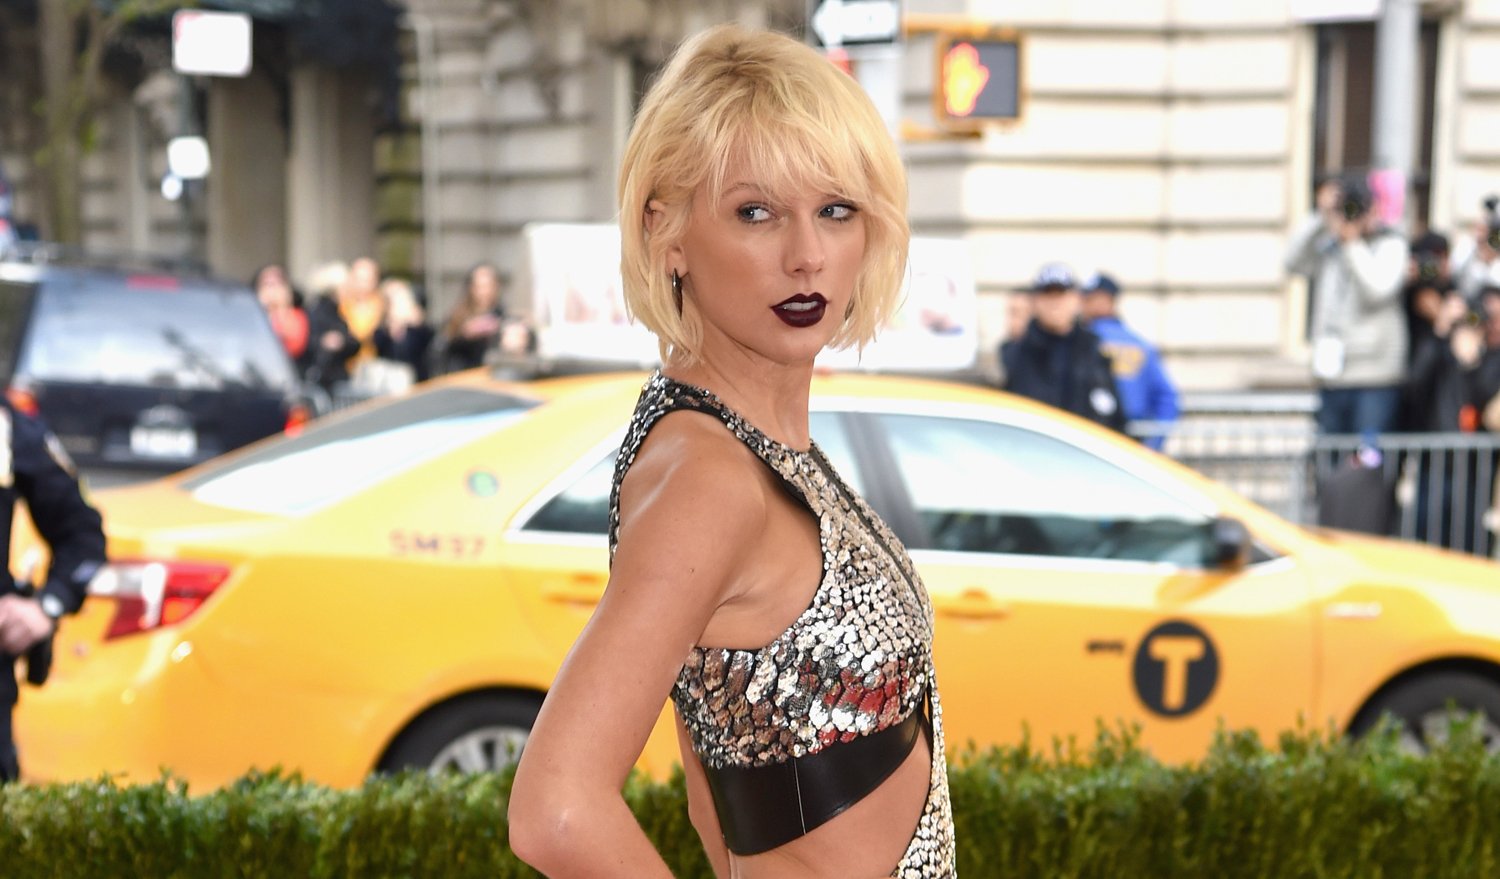 Taylor Swift Wears Louis Vuitton to Co-Chair the 2016 Met Gala